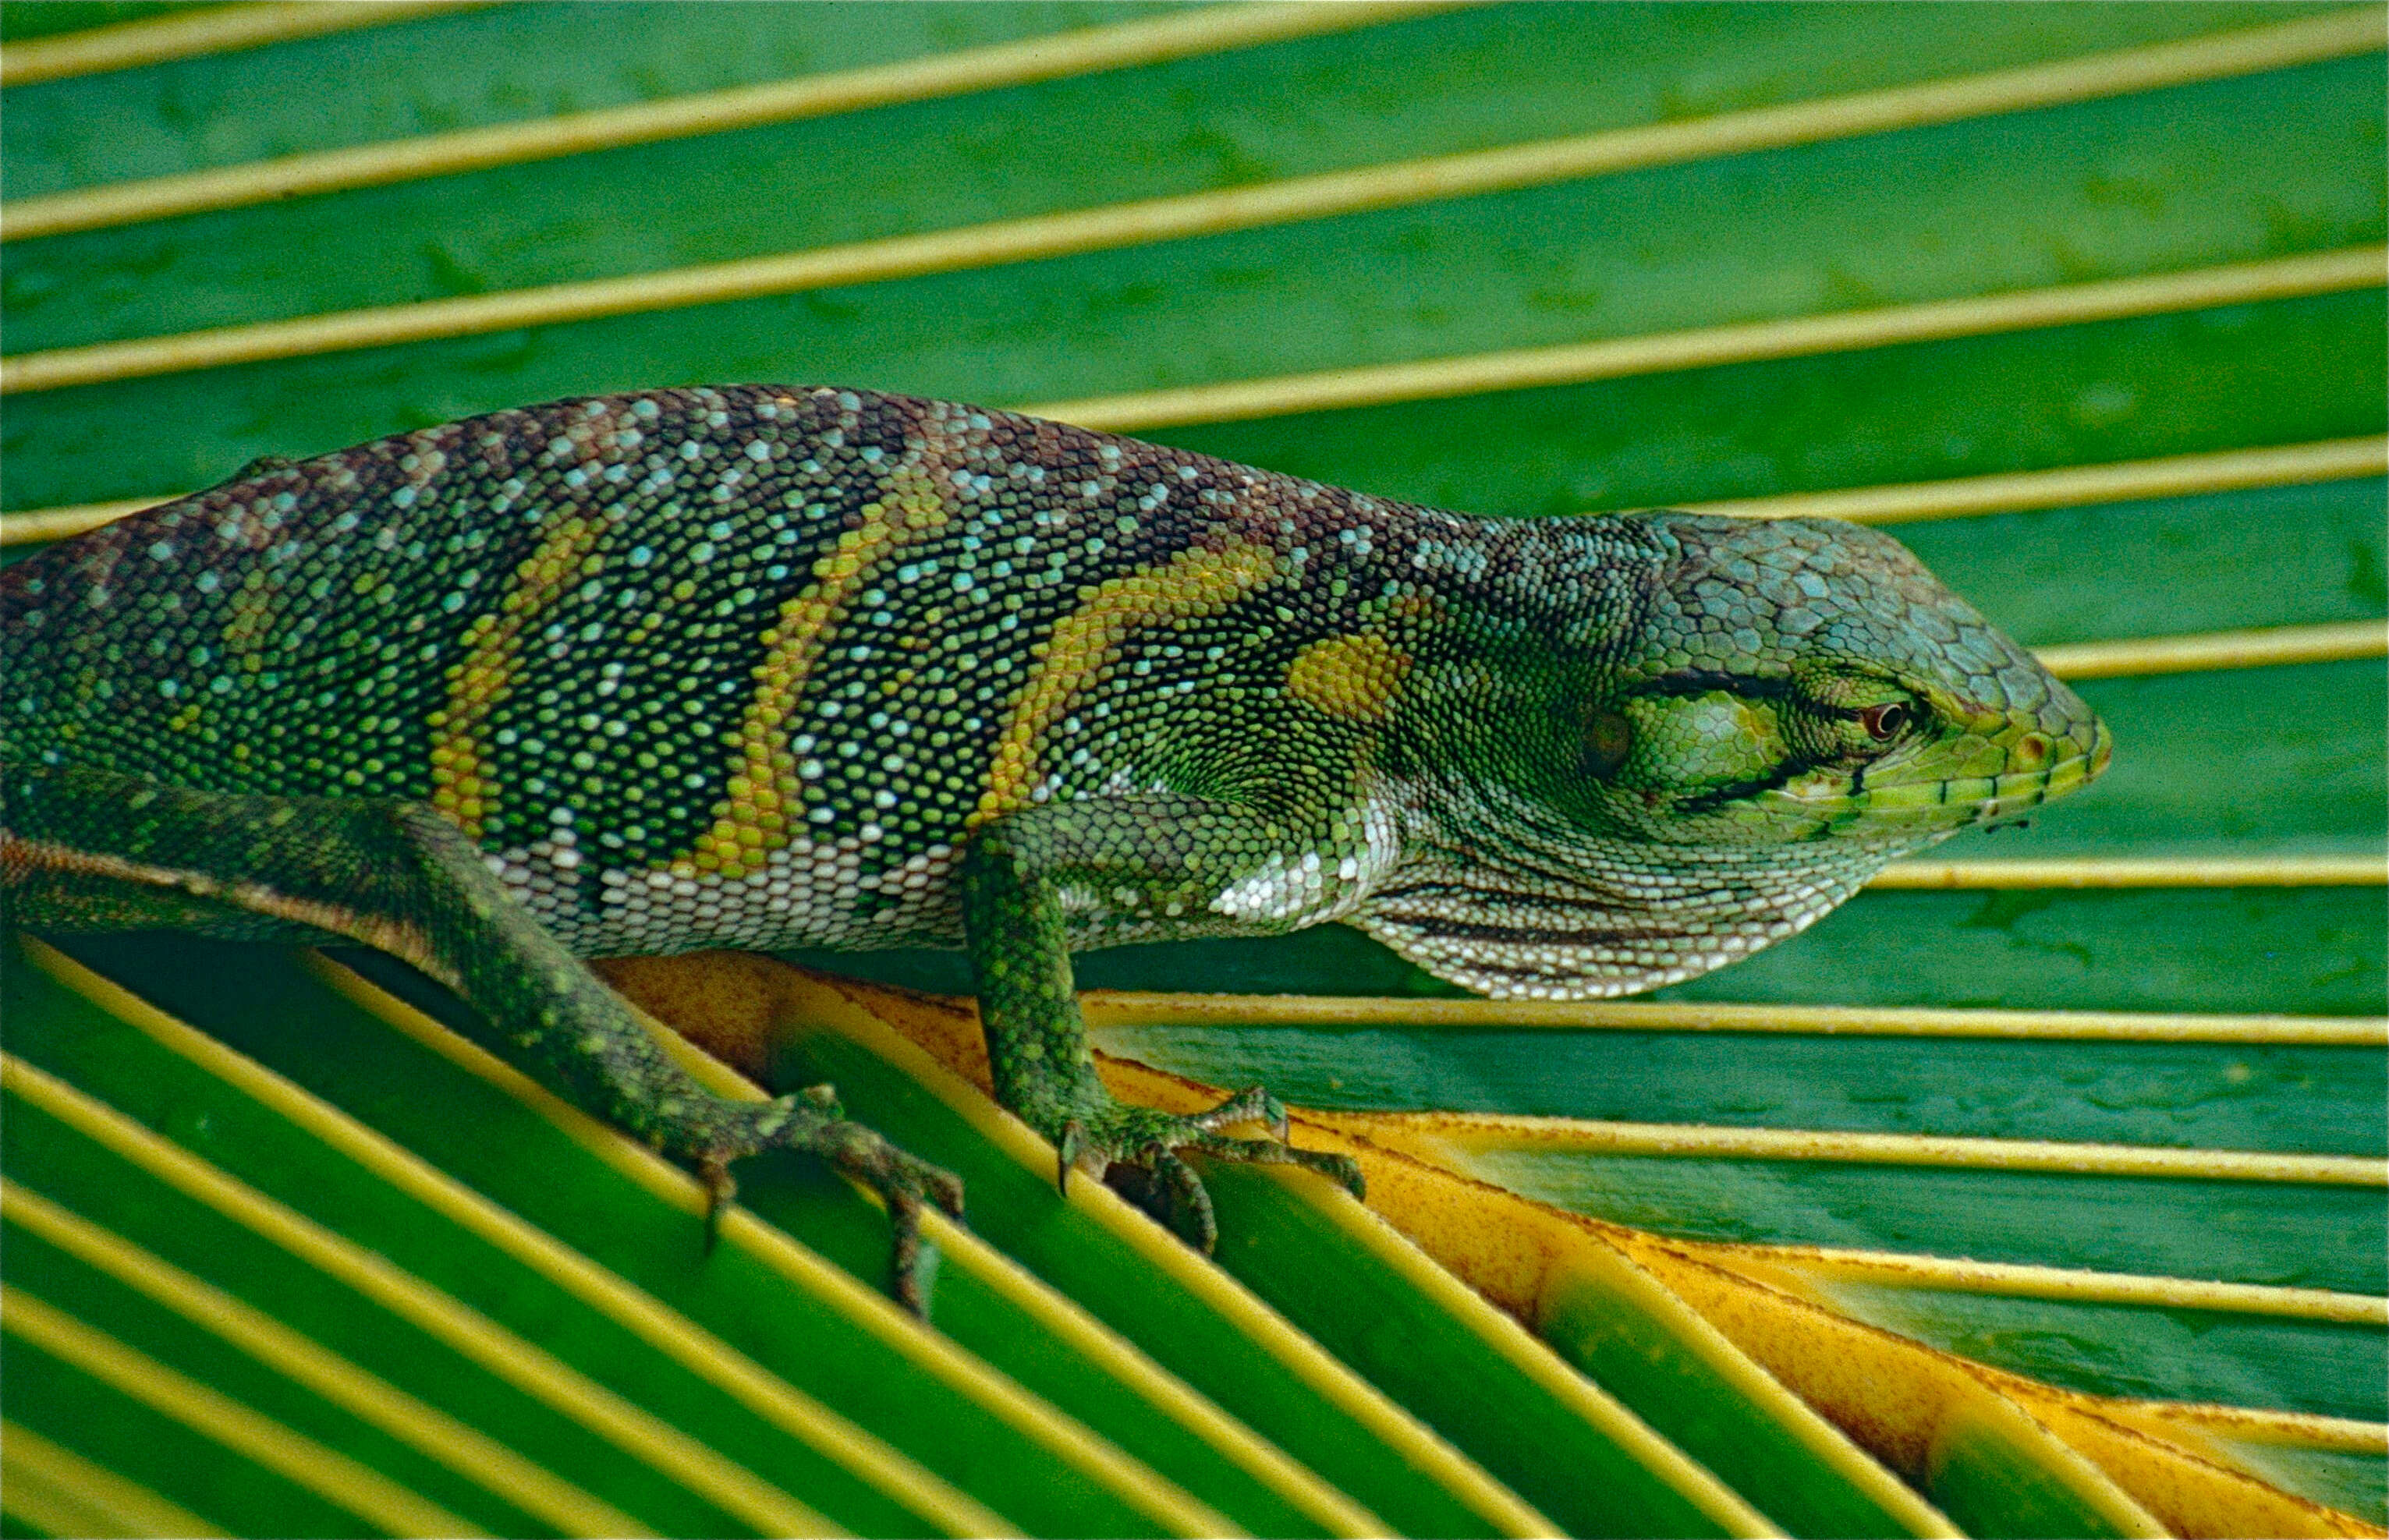 Image of anoles